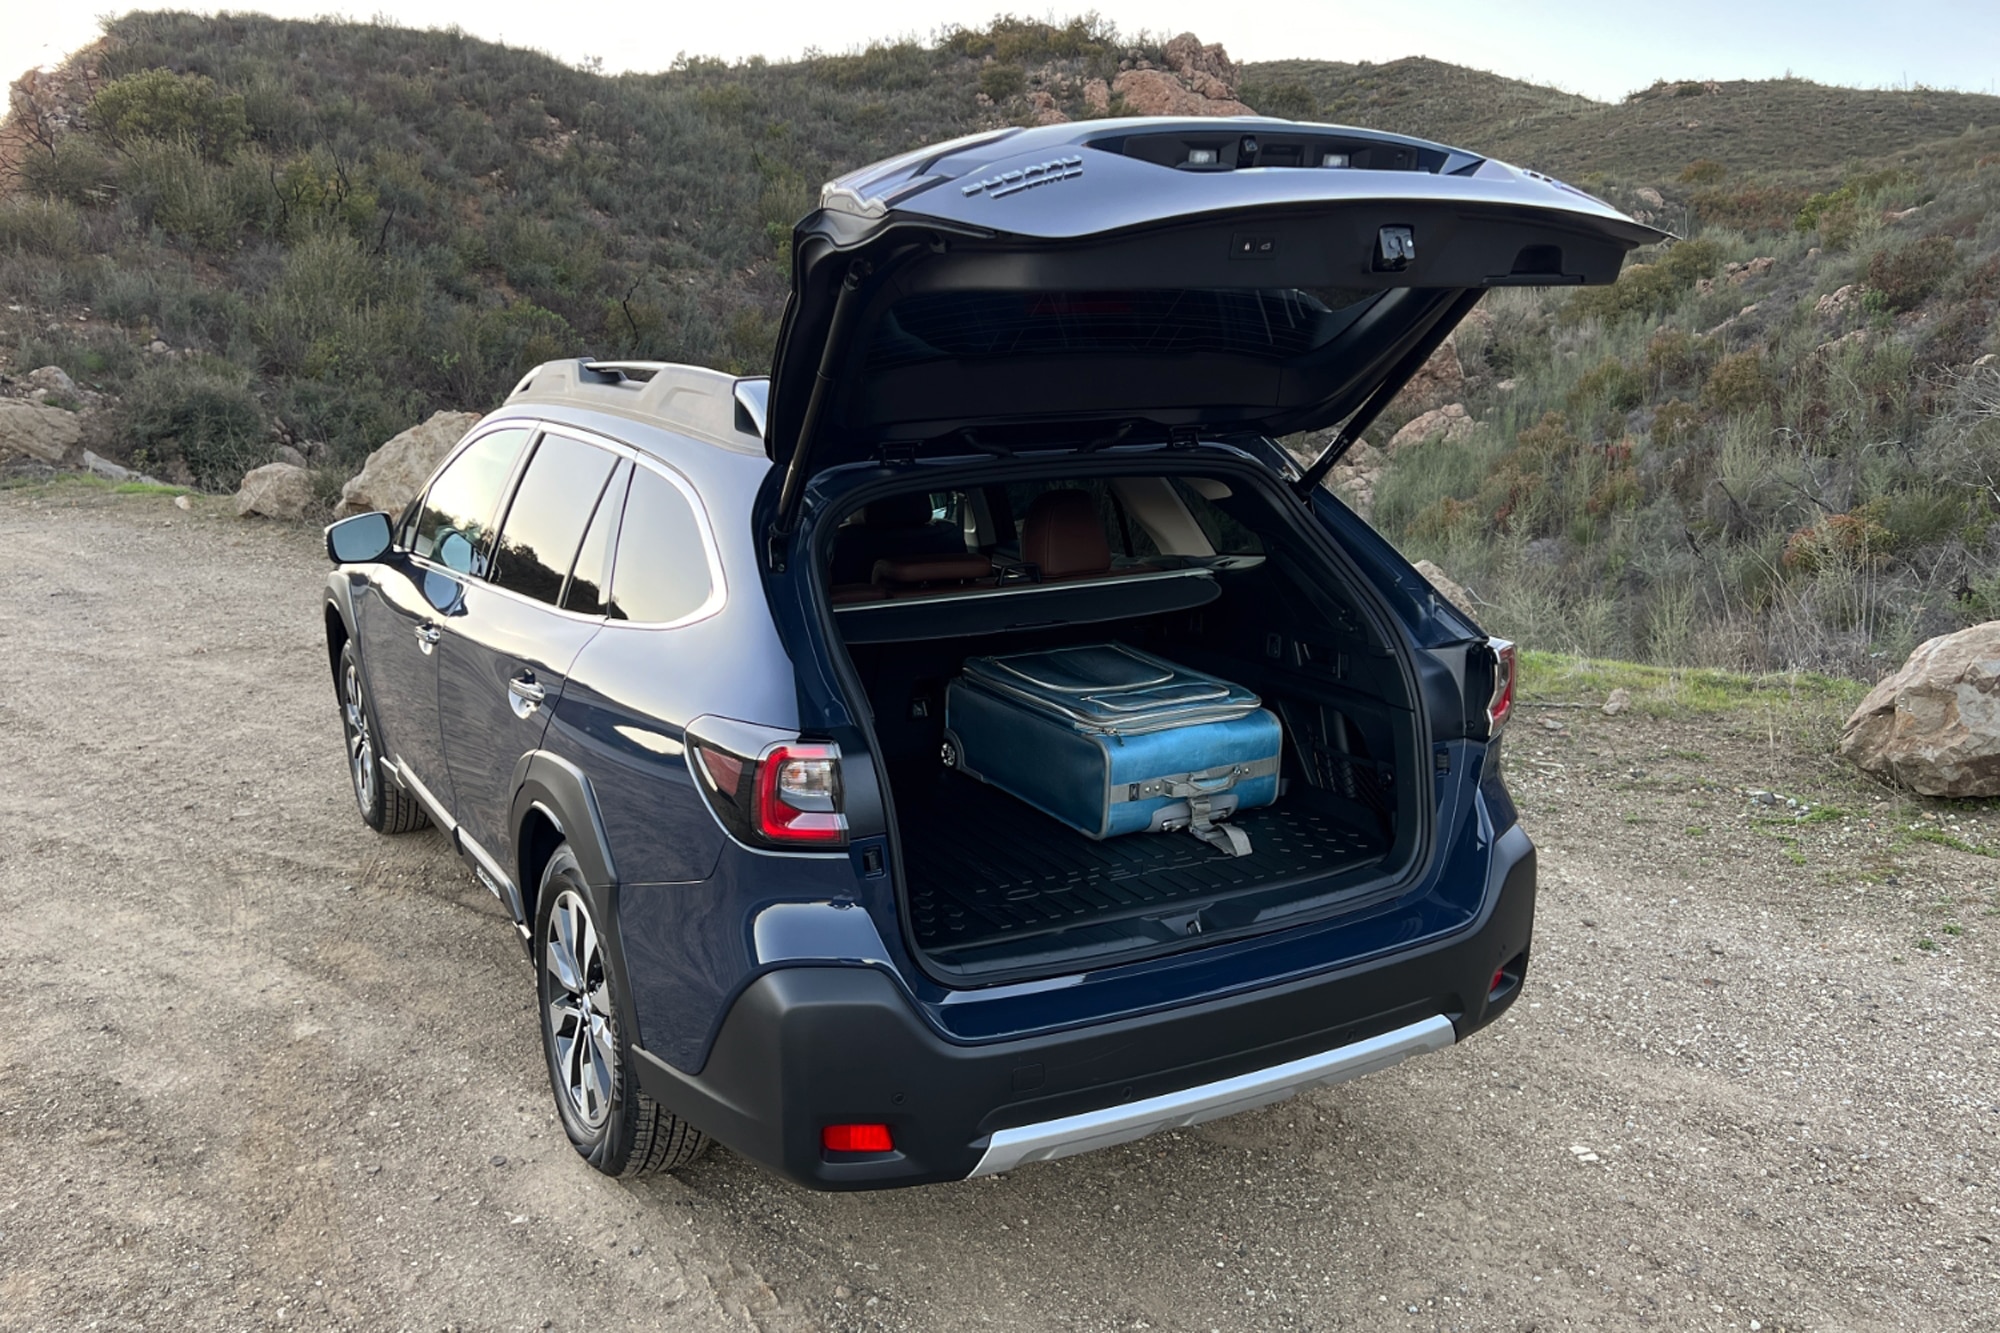 Cosmic Blue 2023 Subaru Outback open cargo space with luggage inside